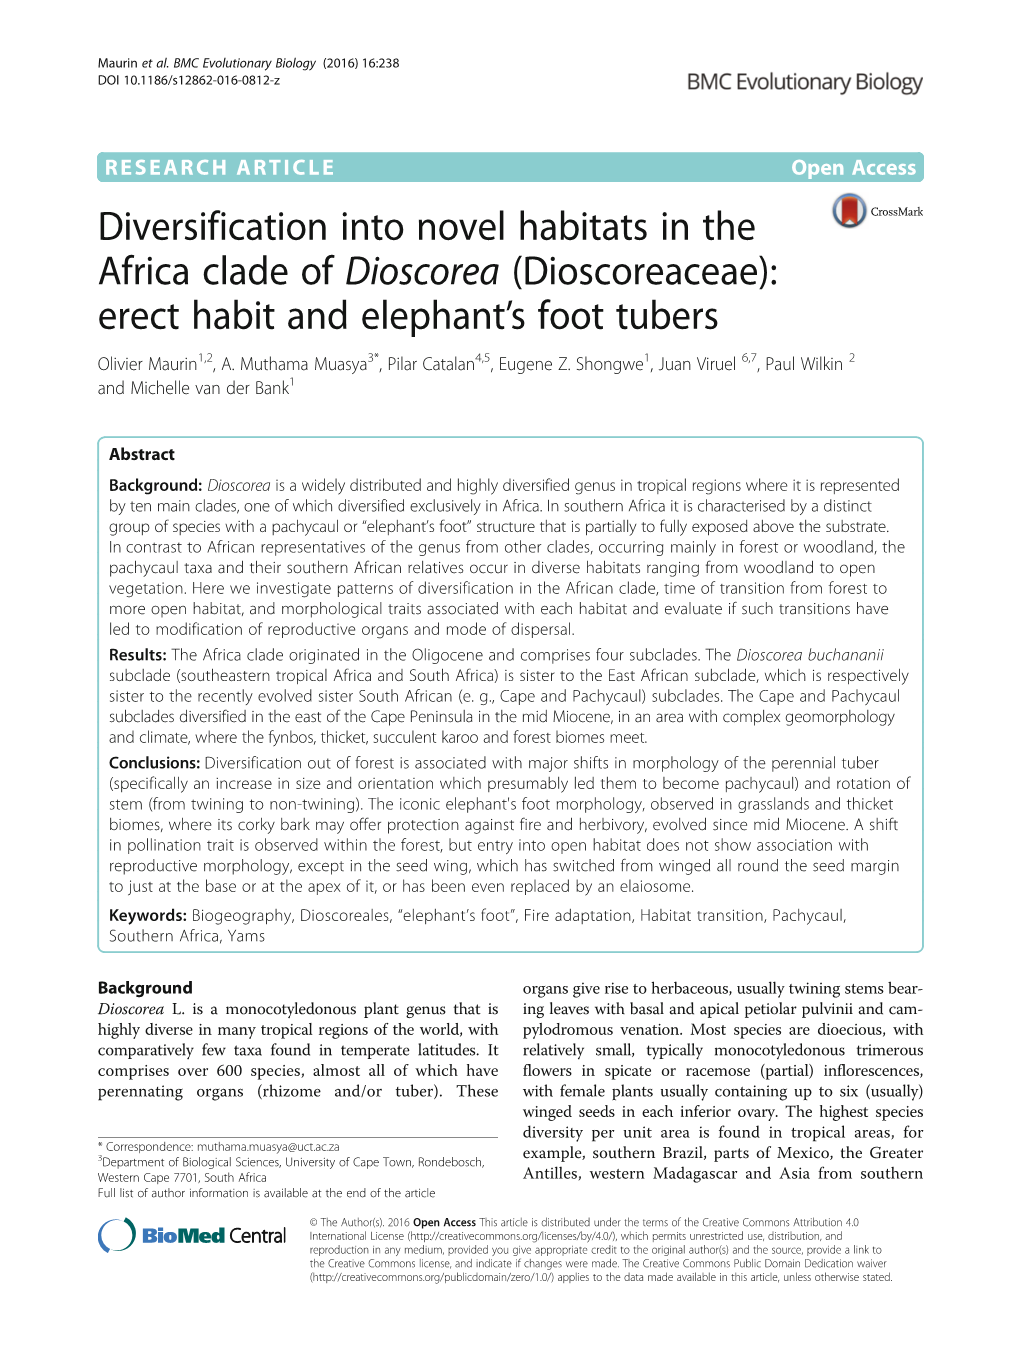 Diversification Into Novel Habitats in the Africa Clade of Dioscorea (Dioscoreaceae): Erect Habit and Elephant’S Foot Tubers Olivier Maurin1,2, A